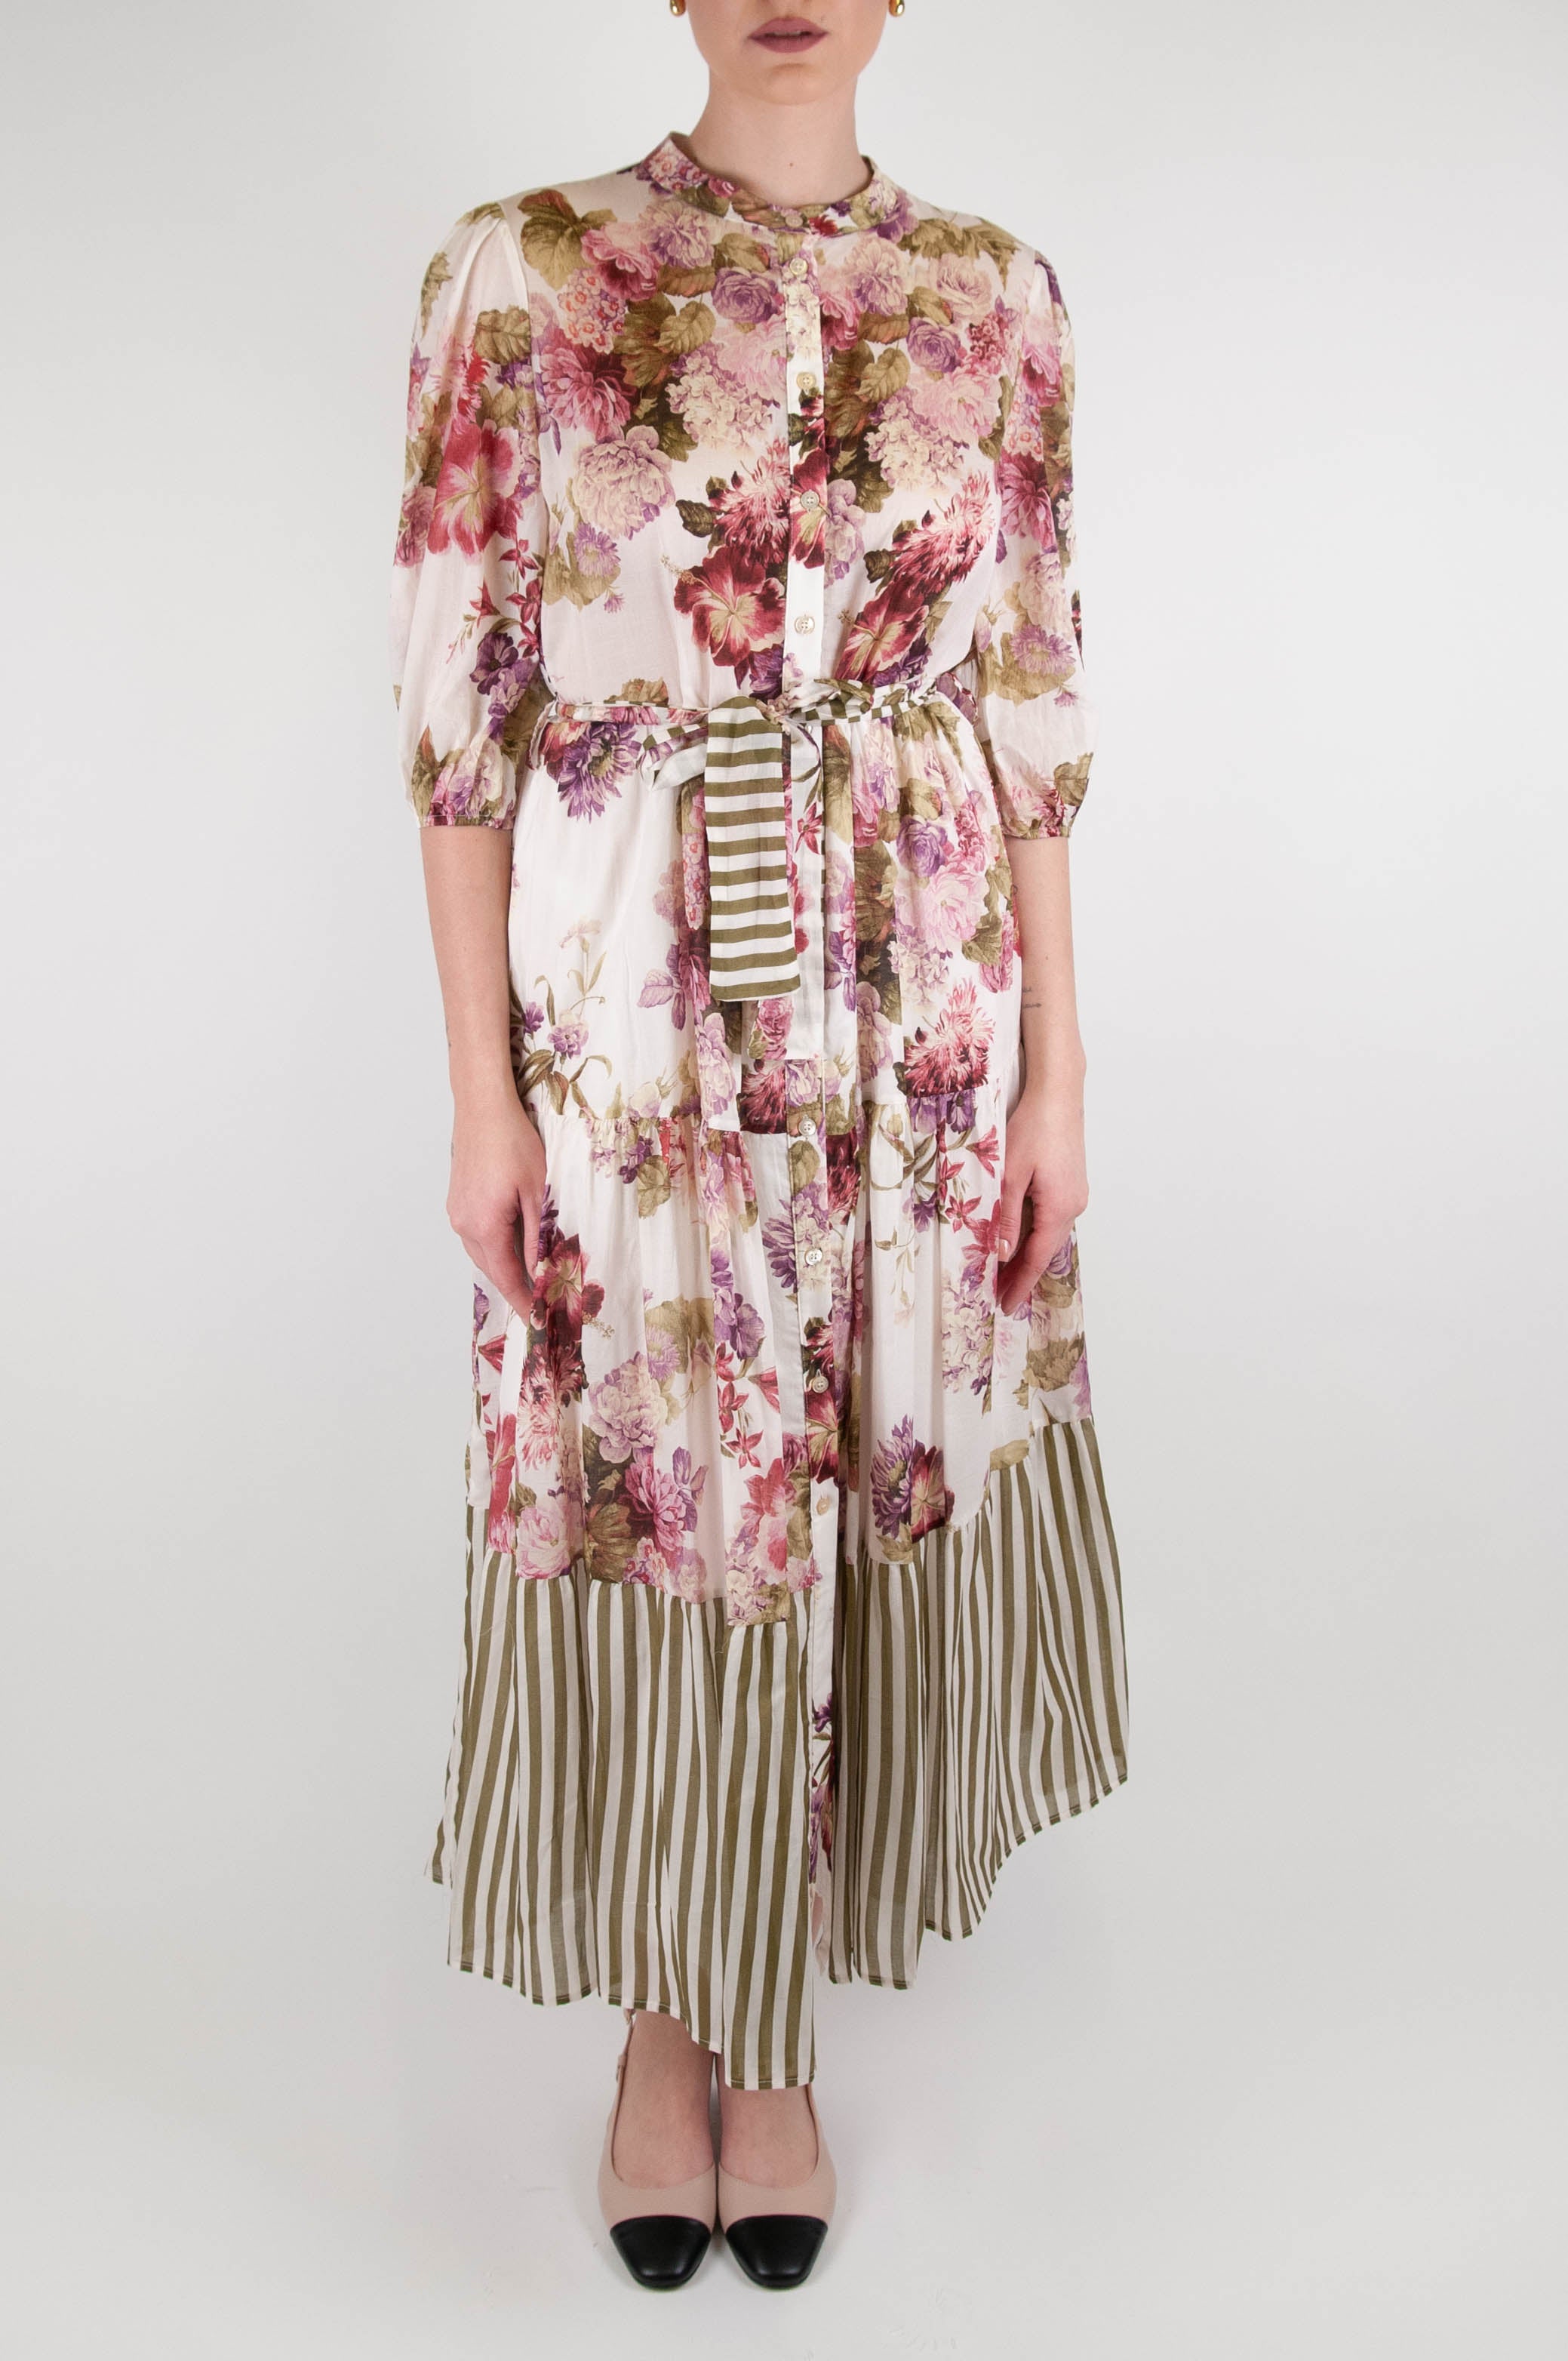 Tension in - Flower and striped patterned cotton muslin shirt dress with belt at the waist